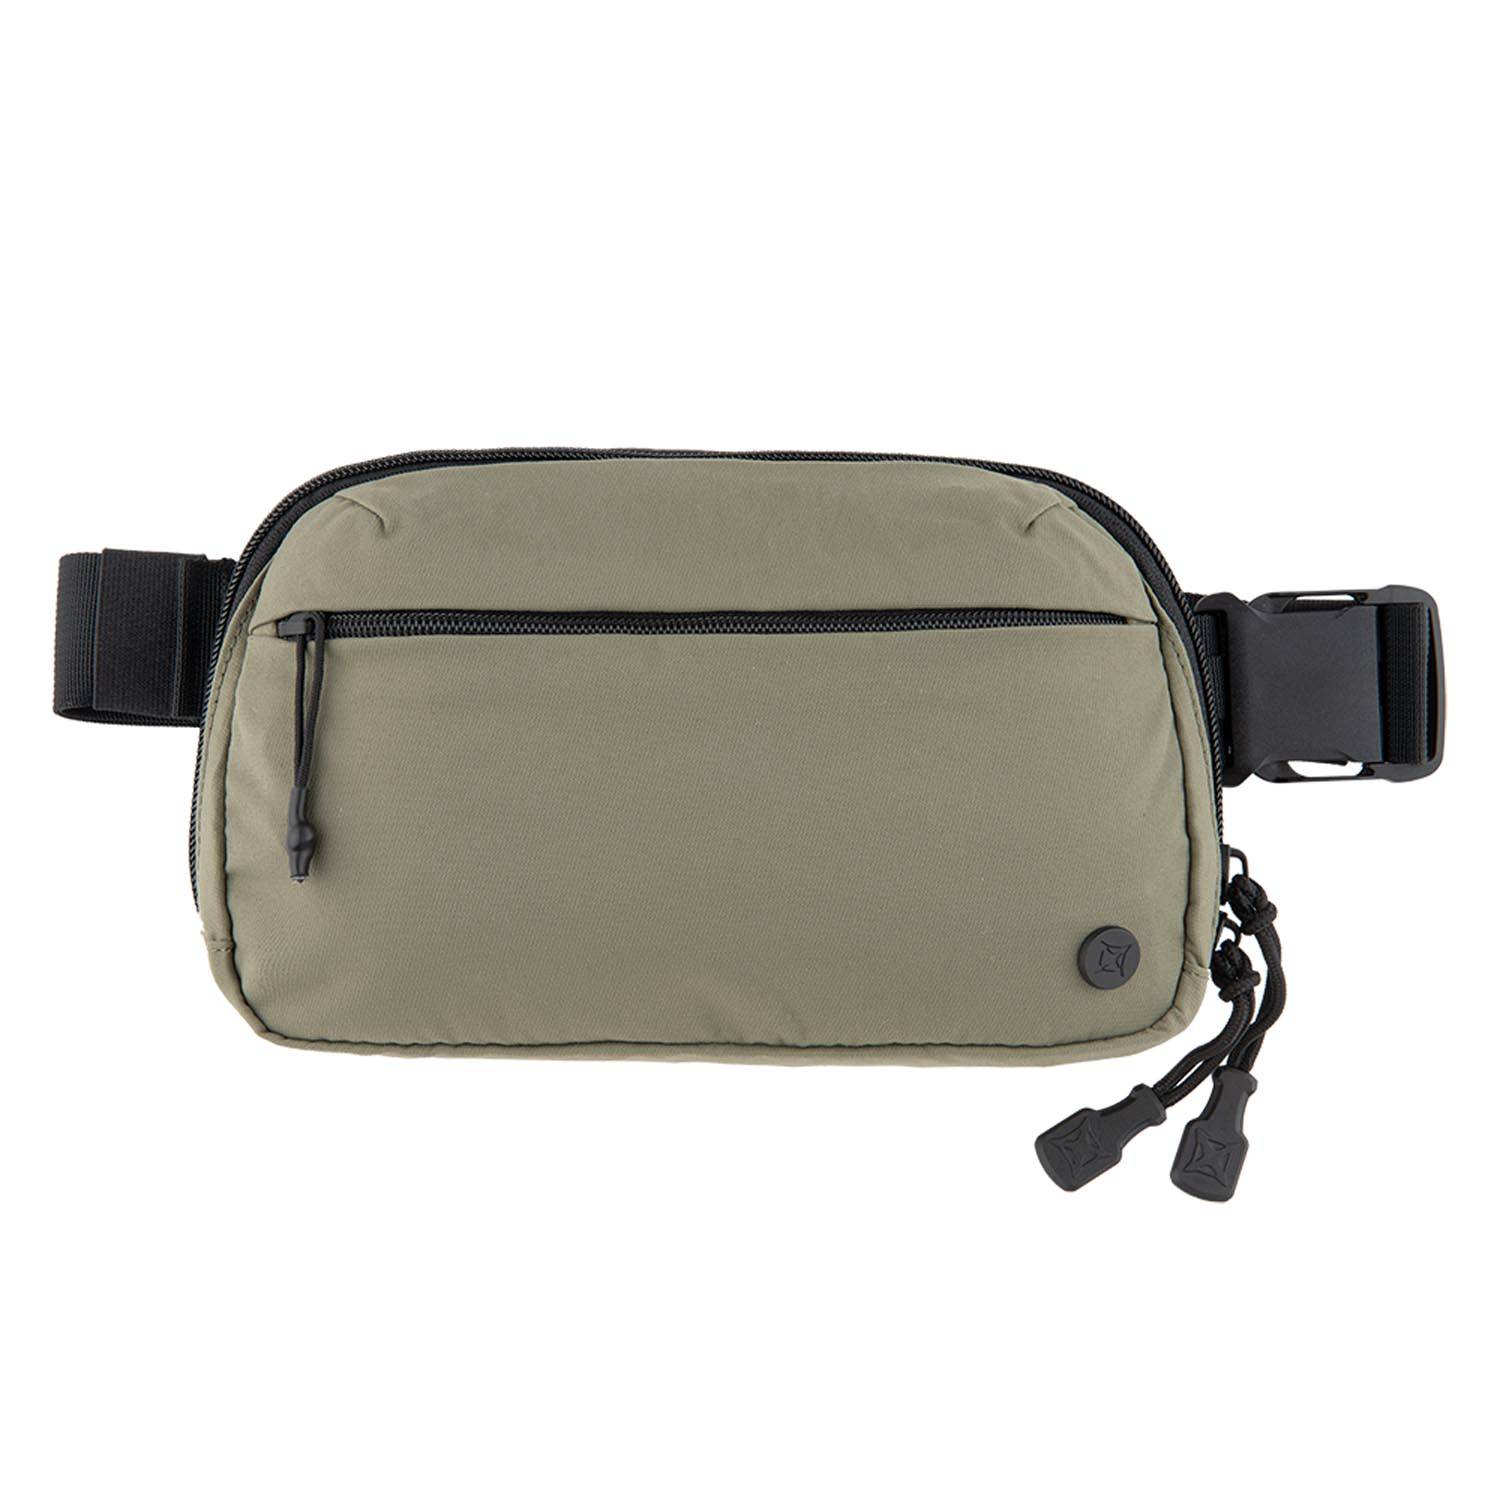 Gear | Bags and Packs | US Patriot Tactical